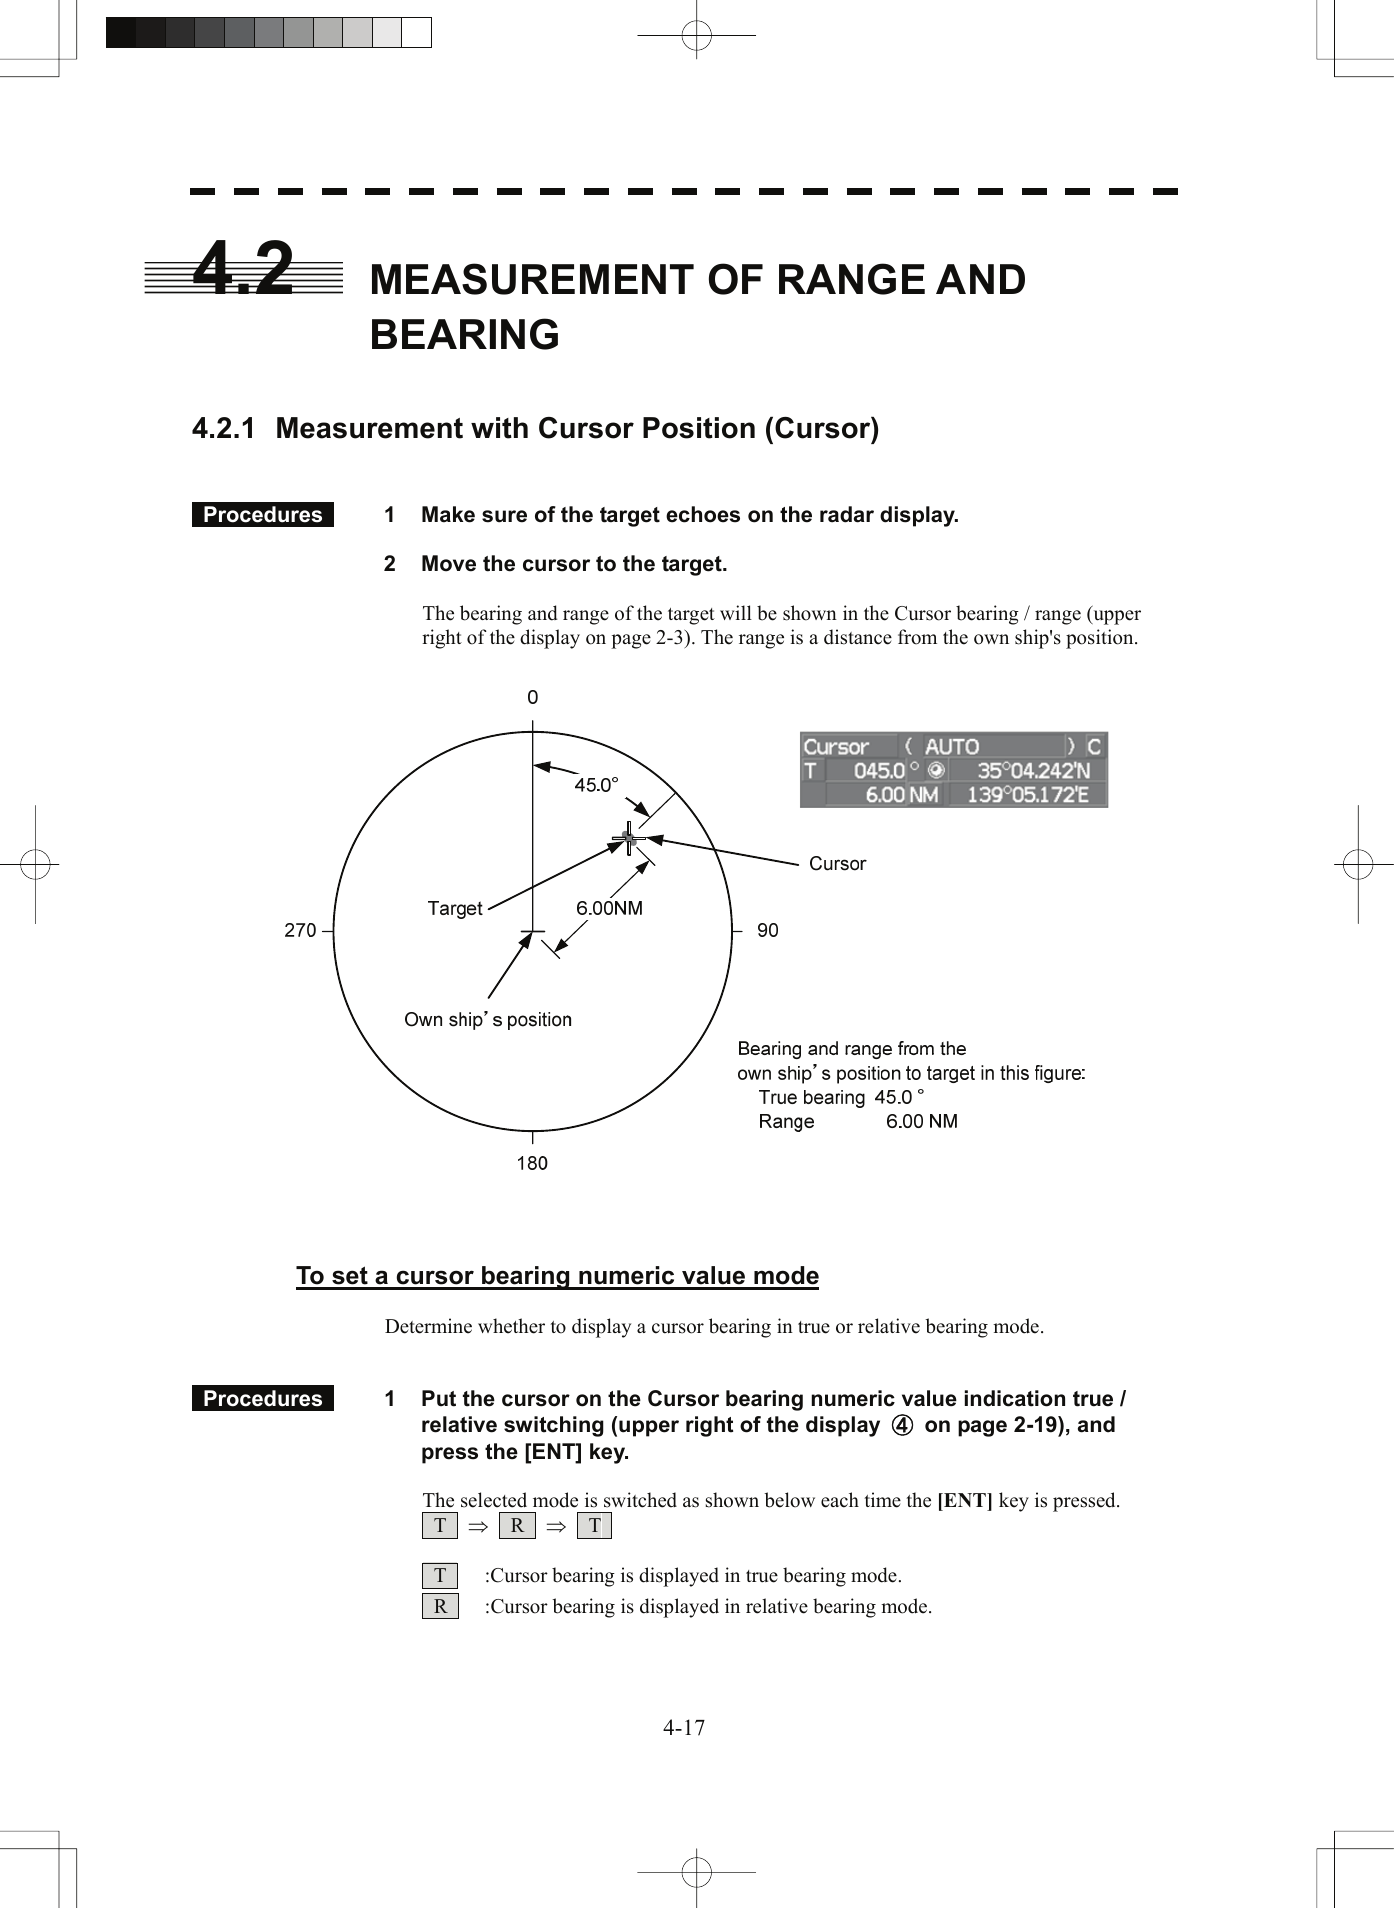  4.2  MEASUREMENT OF RANGE AND BEARING    4.2.1  Measurement with Cursor Position (Cursor)    Procedures   1  Make sure of the target echoes on the radar display.    2  Move the cursor to the target.  The bearing and range of the target will be shown in the Cursor bearing / range (upper right of the display on page 2-3). The range is a distance from the own ship&apos;s position.      To set a cursor bearing numeric value mode  Determine whether to display a cursor bearing in true or relative bearing mode.    Procedures   1  Put the cursor on the Cursor bearing numeric value indication true / relative switching (upper right of the display  ④  on page 2-19), and press the [ENT] key.  The selected mode is switched as shown below each time the [ENT] key is pressed.  T  ⇒  R  ⇒  T     T    :Cursor bearing is displayed in true bearing mode.   R    :Cursor bearing is displayed in relative bearing mode.  4-17 